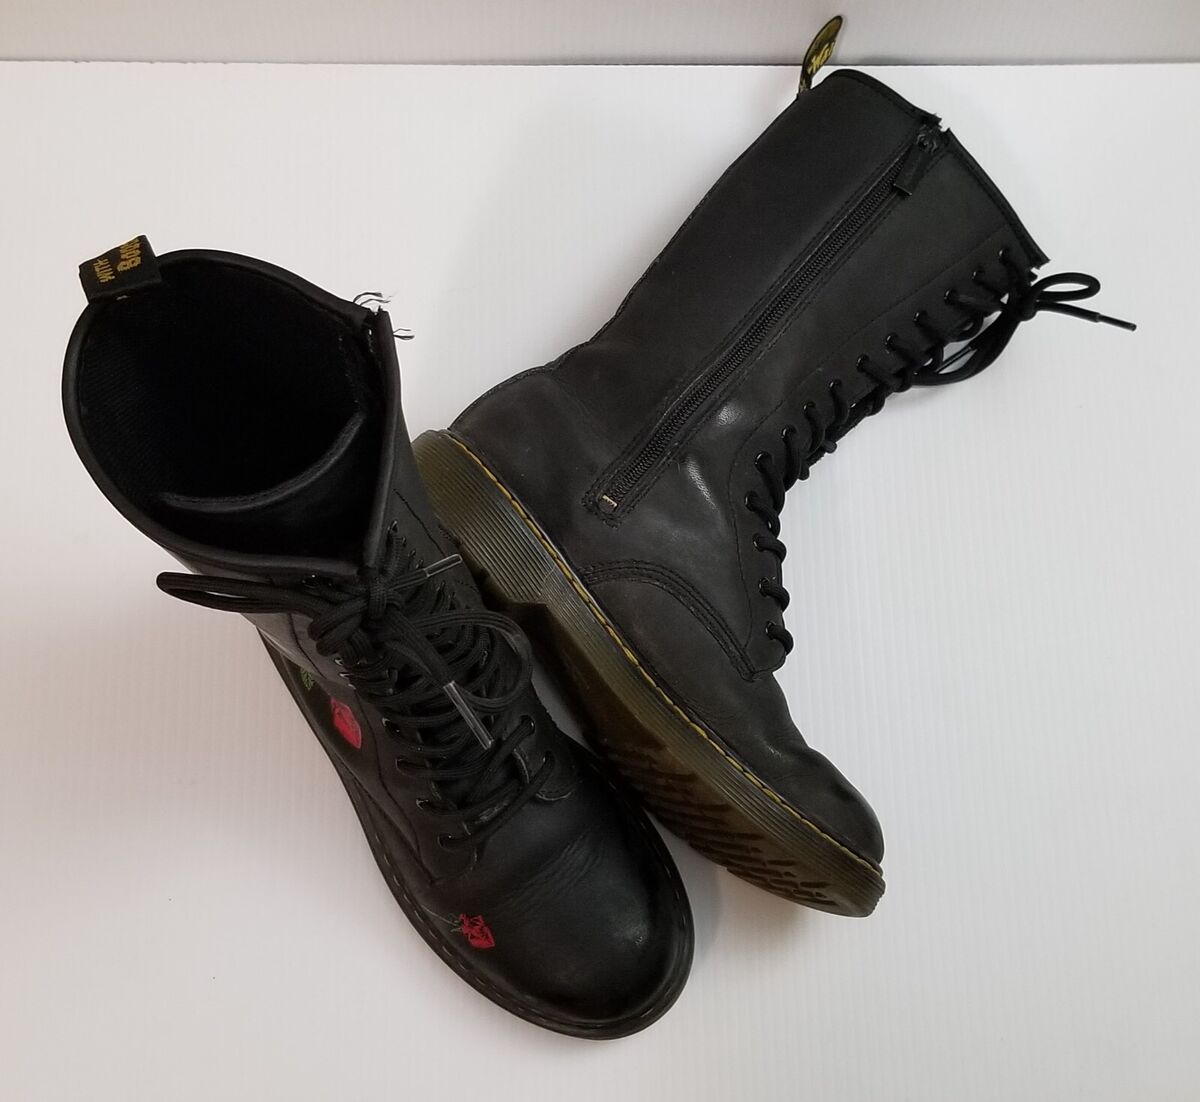 Dr. Martens 1914 Vonda 14 Eye Black Tall Boot w/ Red Rose Embroidery Ladies  Sz 5